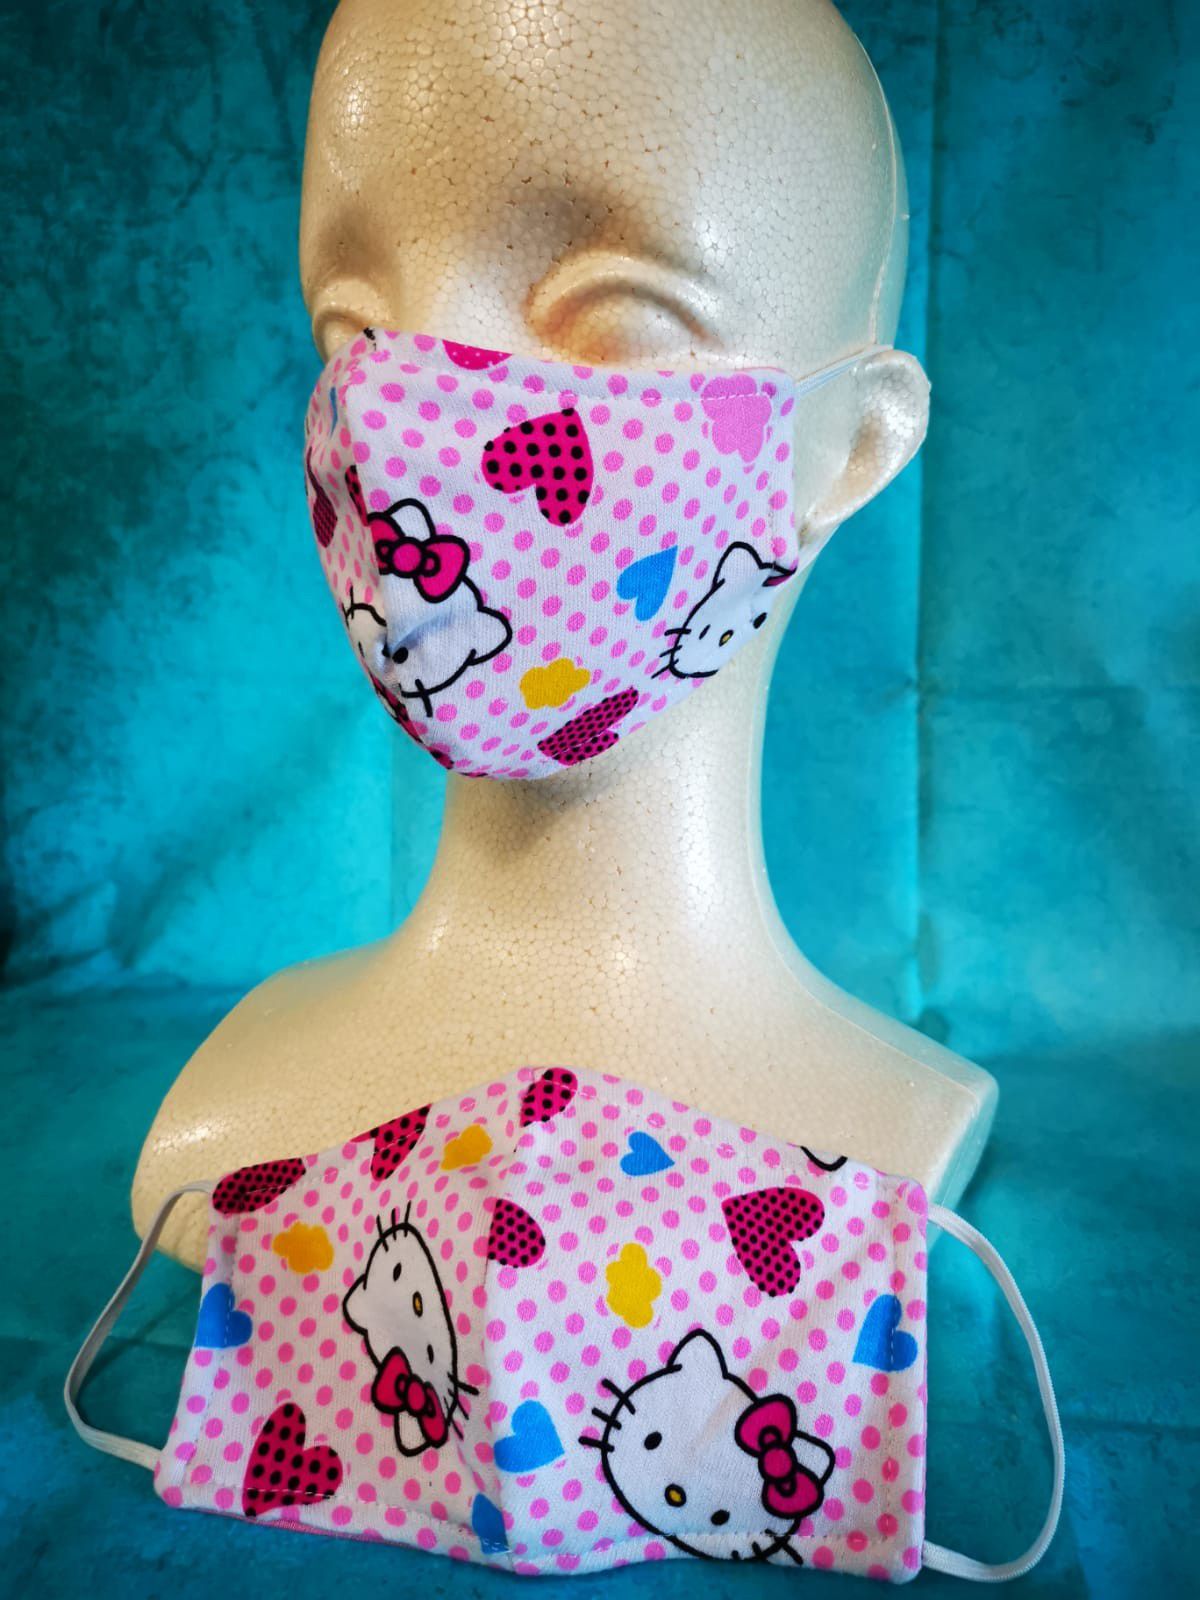 Kids Face mask (Hello Kitty polka dots): Hand made mask, reversible, reusable, washer and dryer safe.